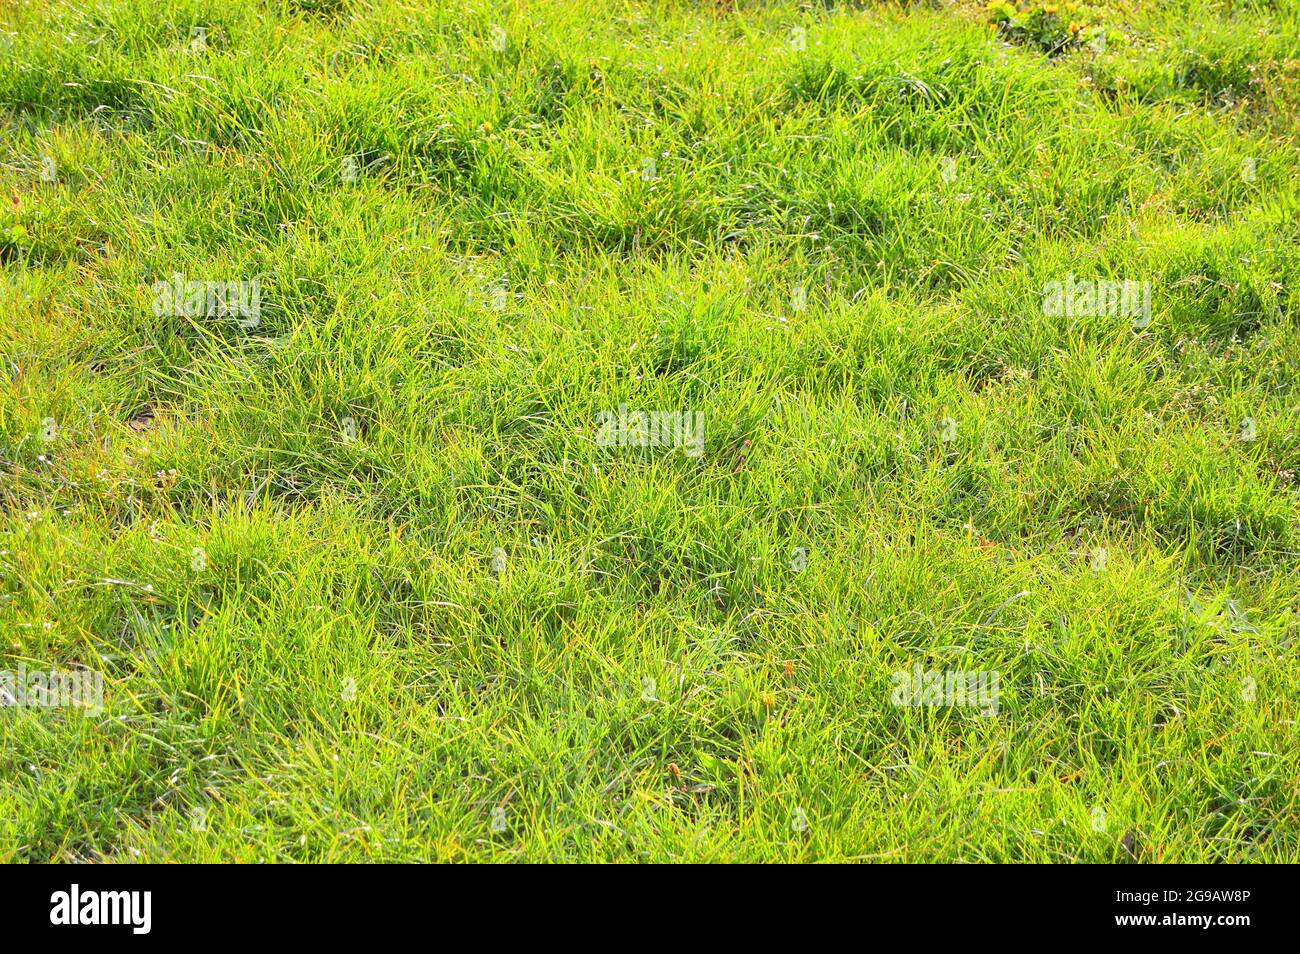 A lawn and a blade of grass zoomed in on a sunny day. Summer Stock Photo